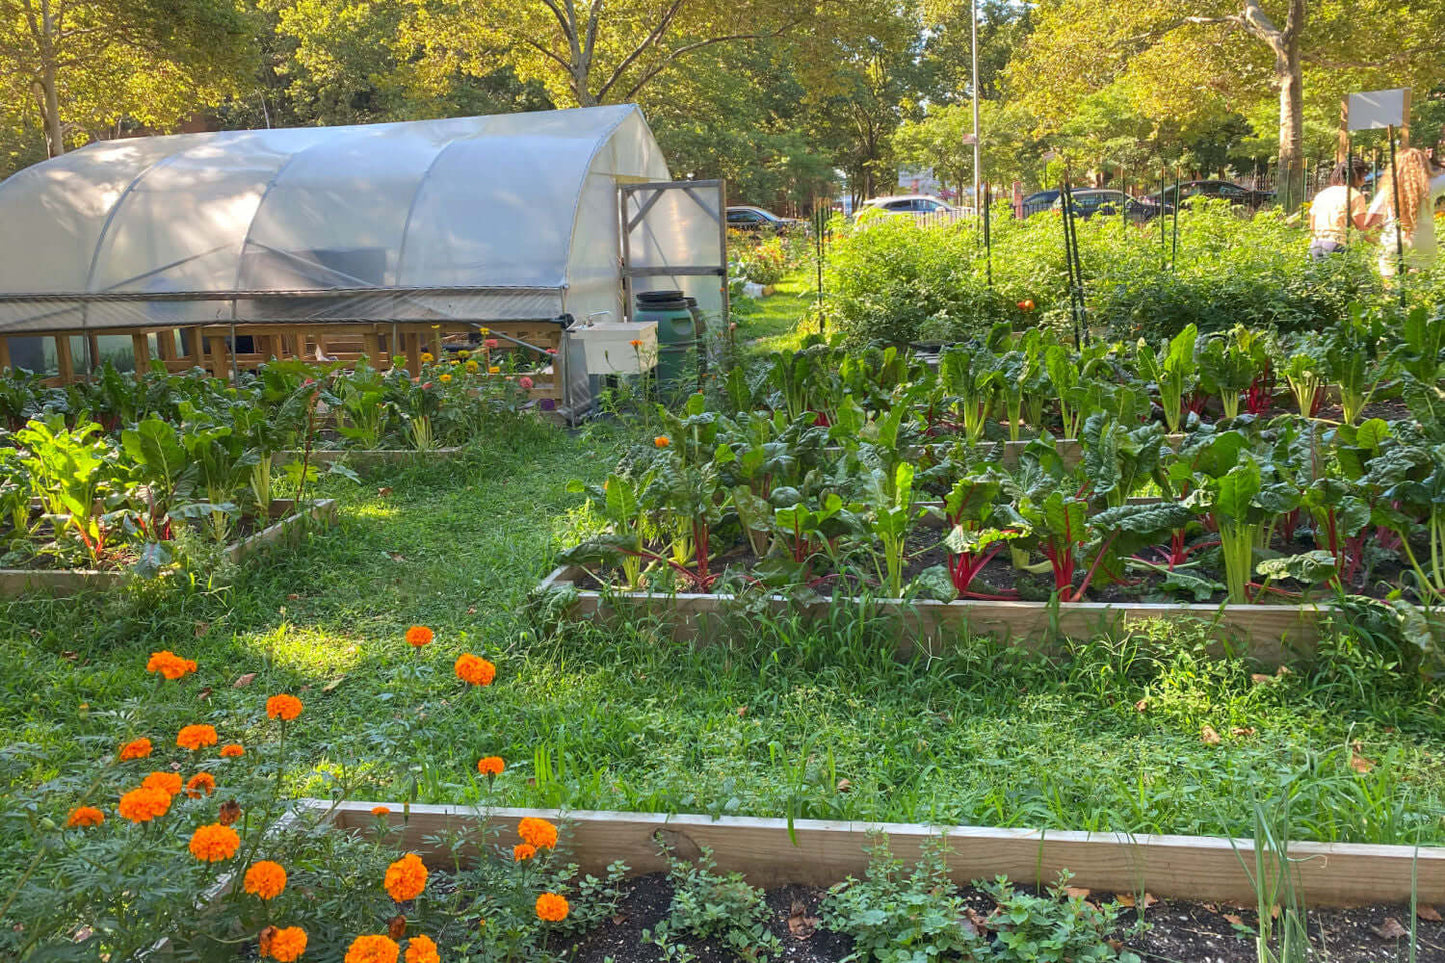 Greenhouses of United Community Centers Eastern New York Farms! in Brooklyn, New York. Photo credit: UCC